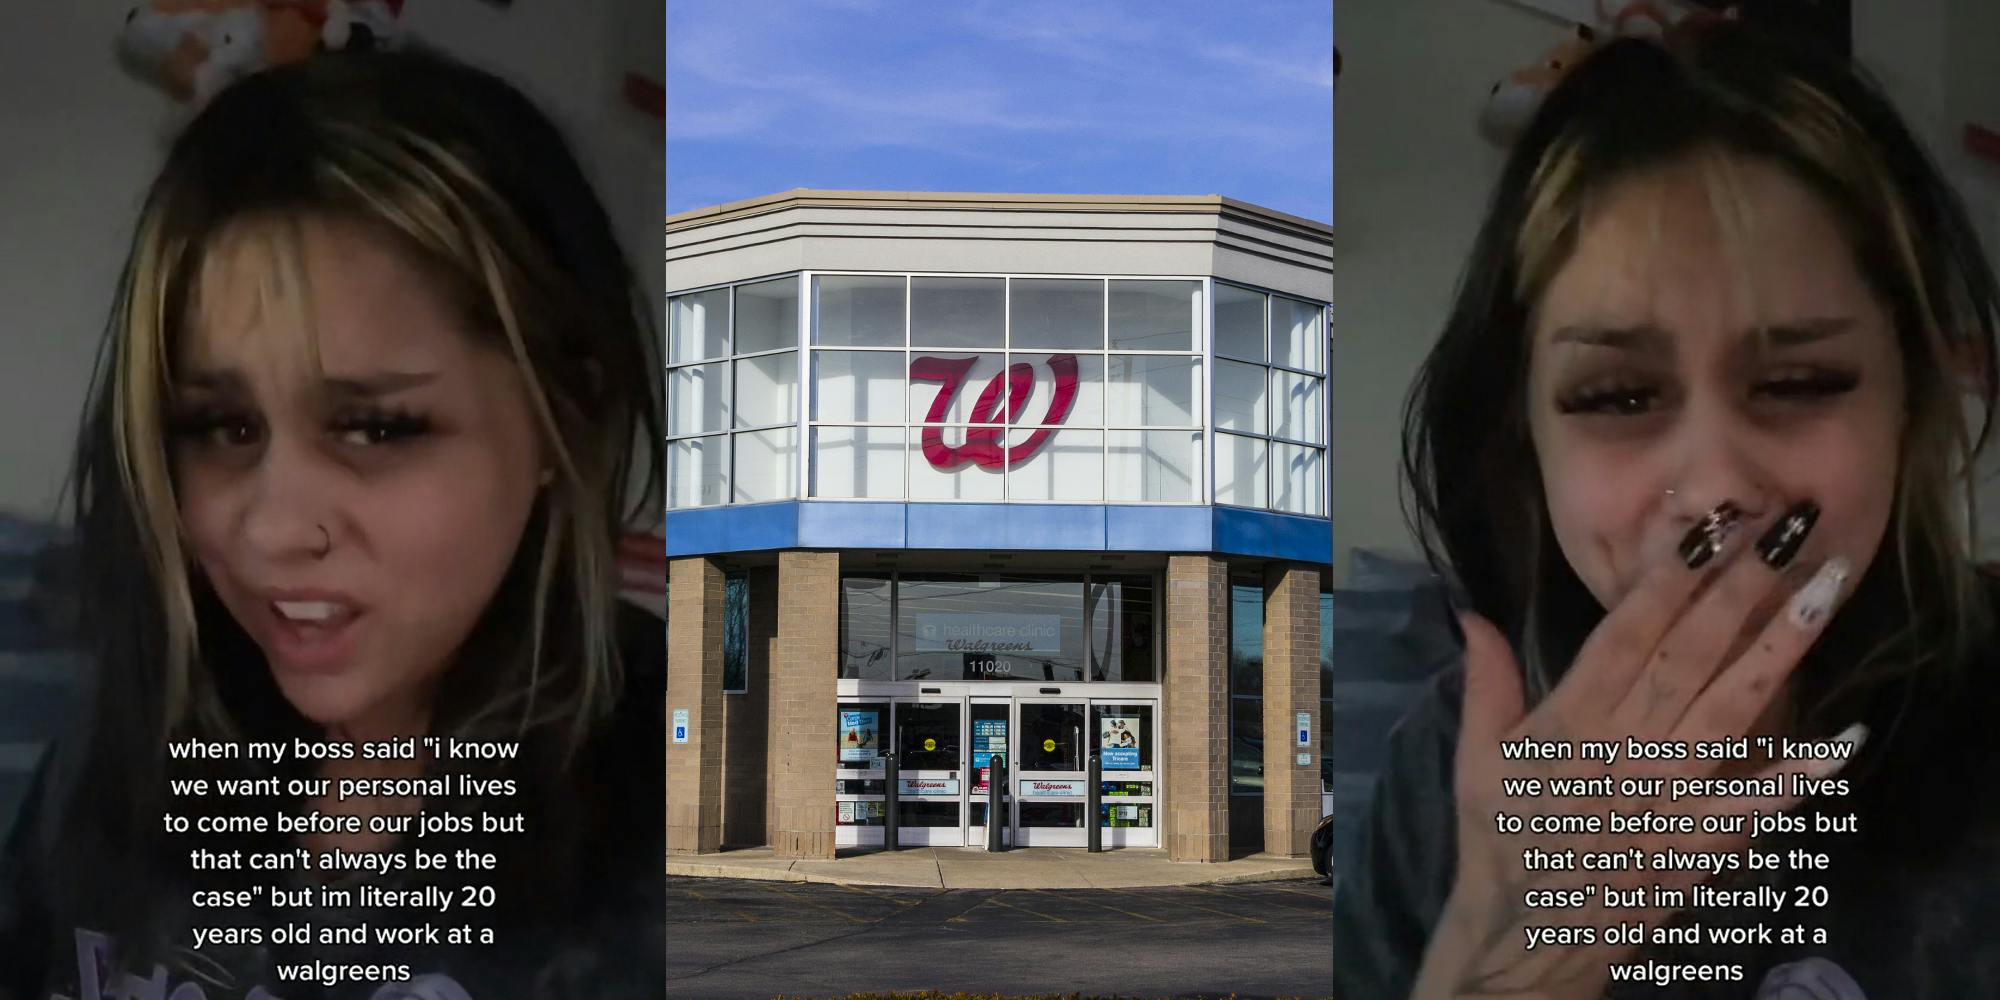 Walgreens employee with caption "when my boss said "i know we want our personal lives to come before our jobs but that can't always be the case" but im literally 20 years old and work at a walgreens" (l) Walgreens building entrance with sign (c) Walgreens employee with caption "when my boss said "i know we want our personal lives to come before our jobs but that can't always be the case" but im literally 20 years old and work at a walgreens" (r)